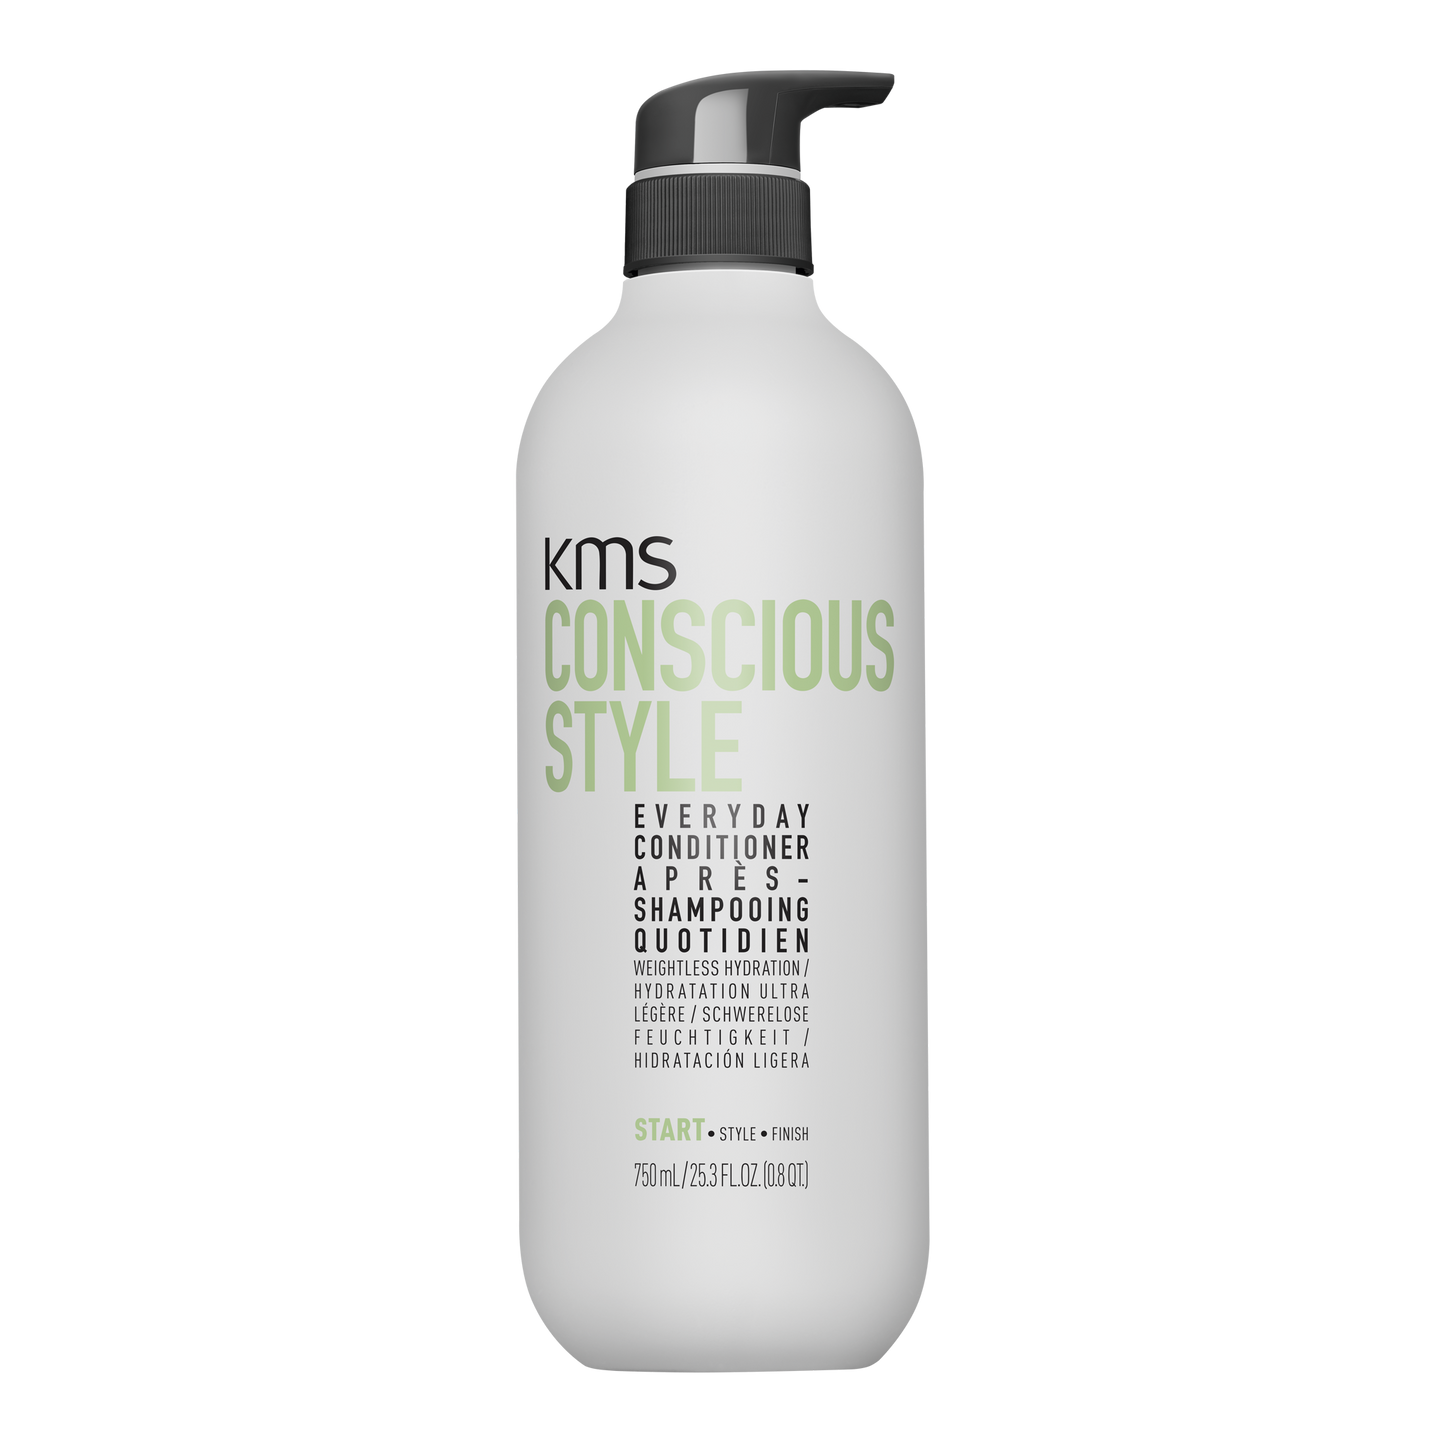 KMS CONSCIOUS STYLE Everyday Conditioner 750mL